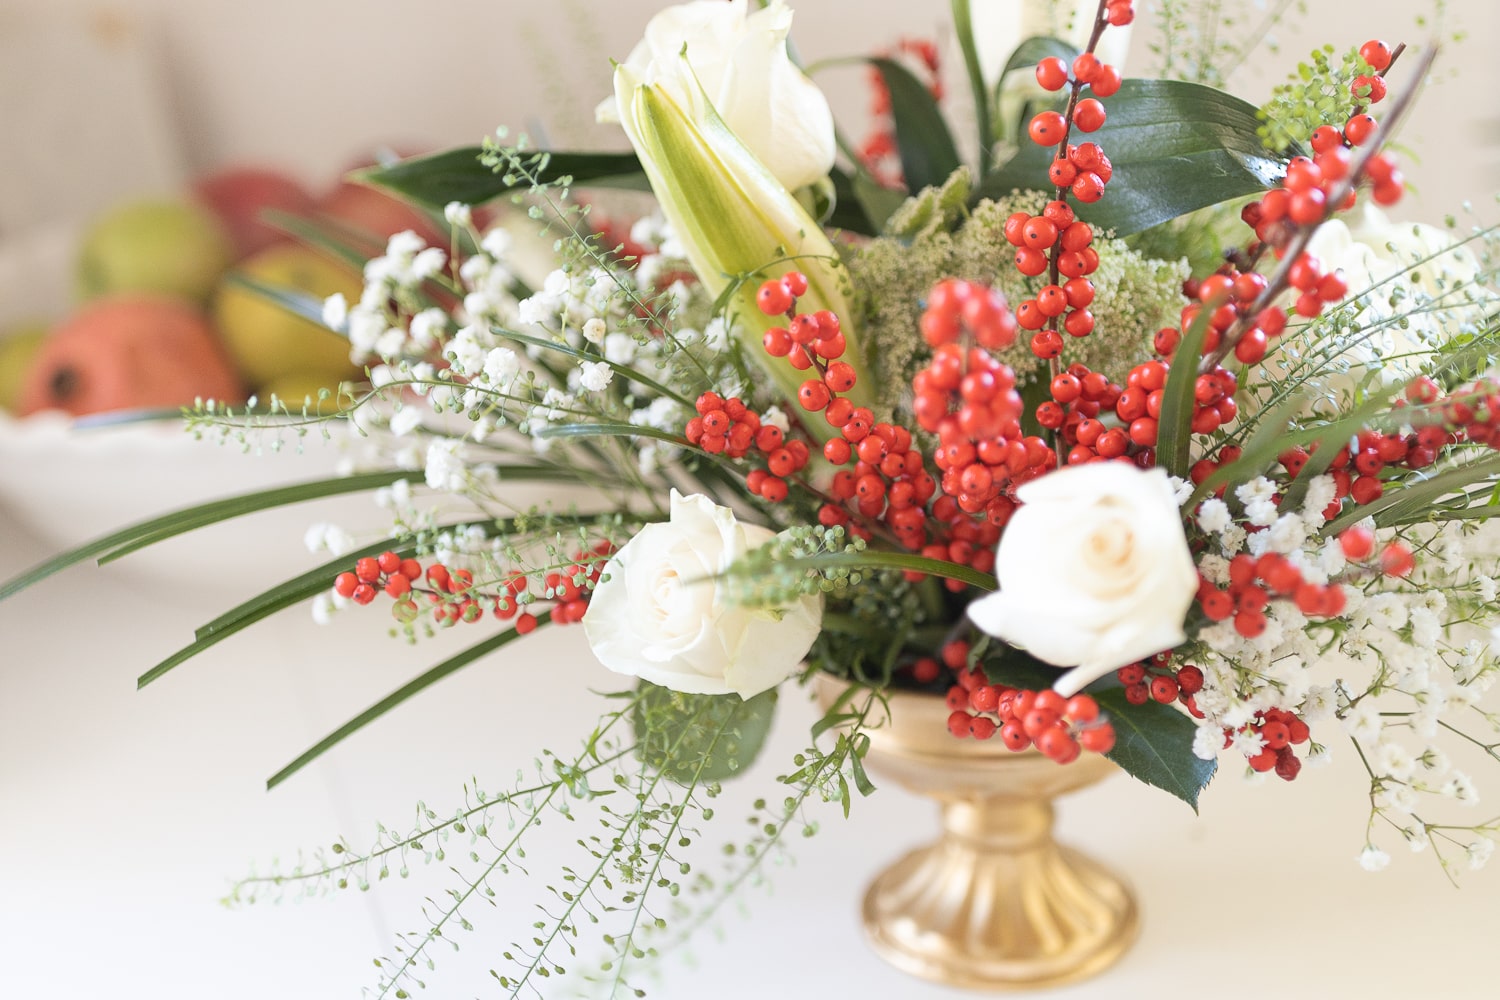 Easy Christmas centerpiece designed by blogger and amateur florist Stephanie Ziajka on Diary of a Debutante